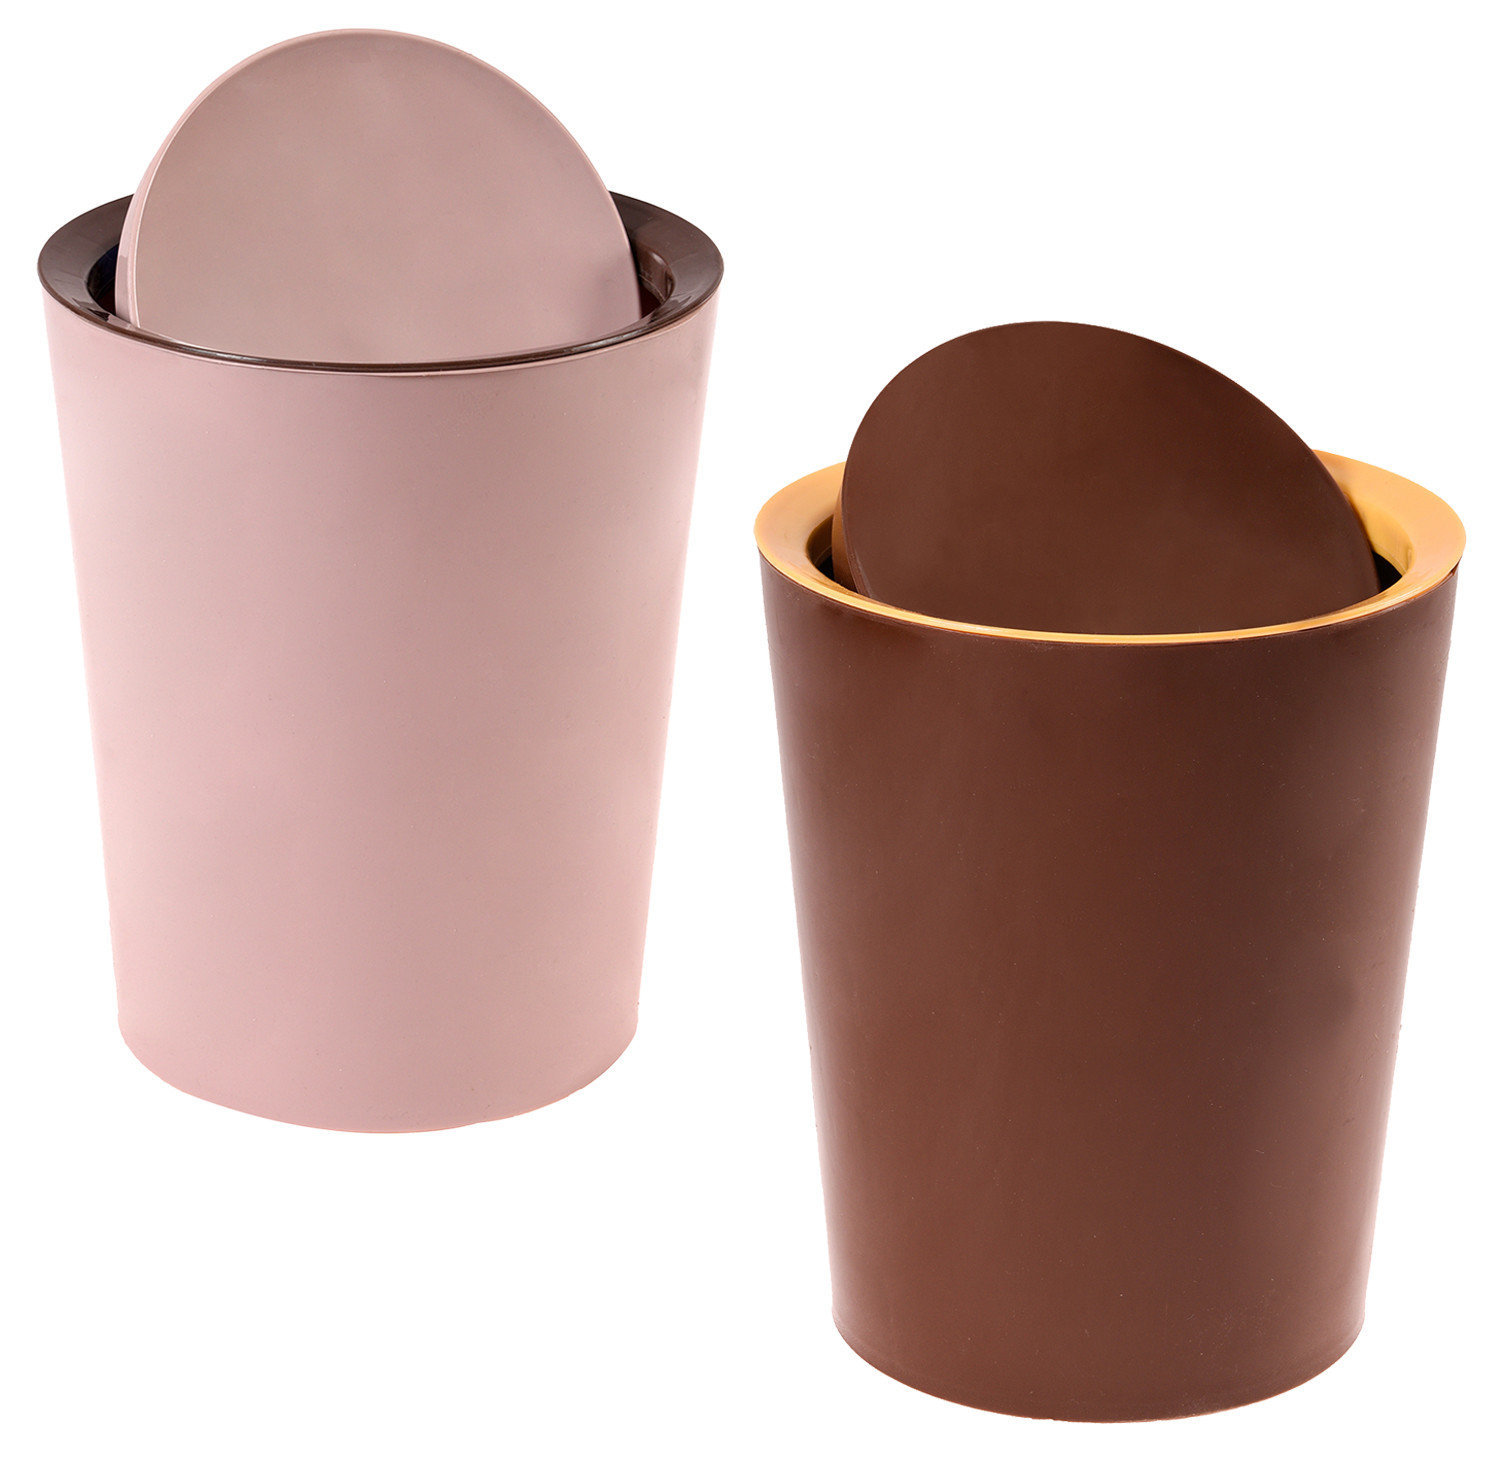 Kuber Industries Swinging Lid Dustbin|Plastic Garbage Waste Bin|Trash Can for Living Room|Kitchen|Office|6 Litre|Pack of 2 (Brown & Peach)